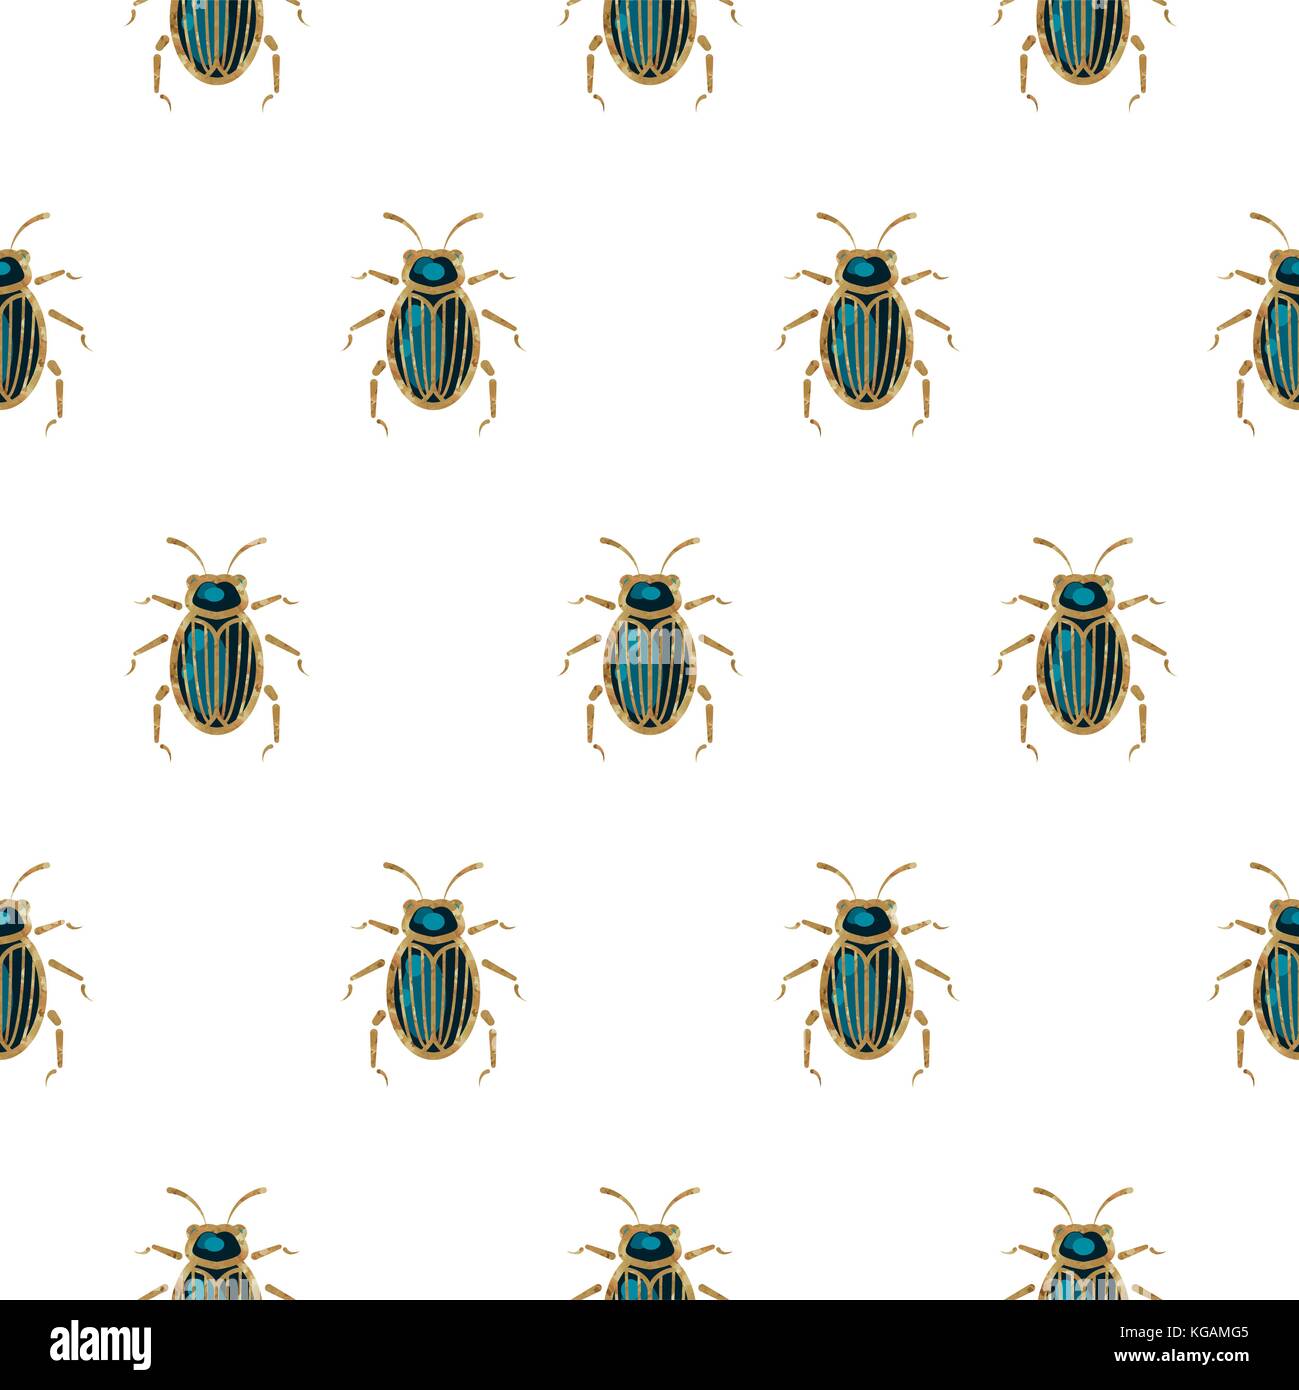 Emerald and gold beetle brooch vector seamless pattern. Stock Vector